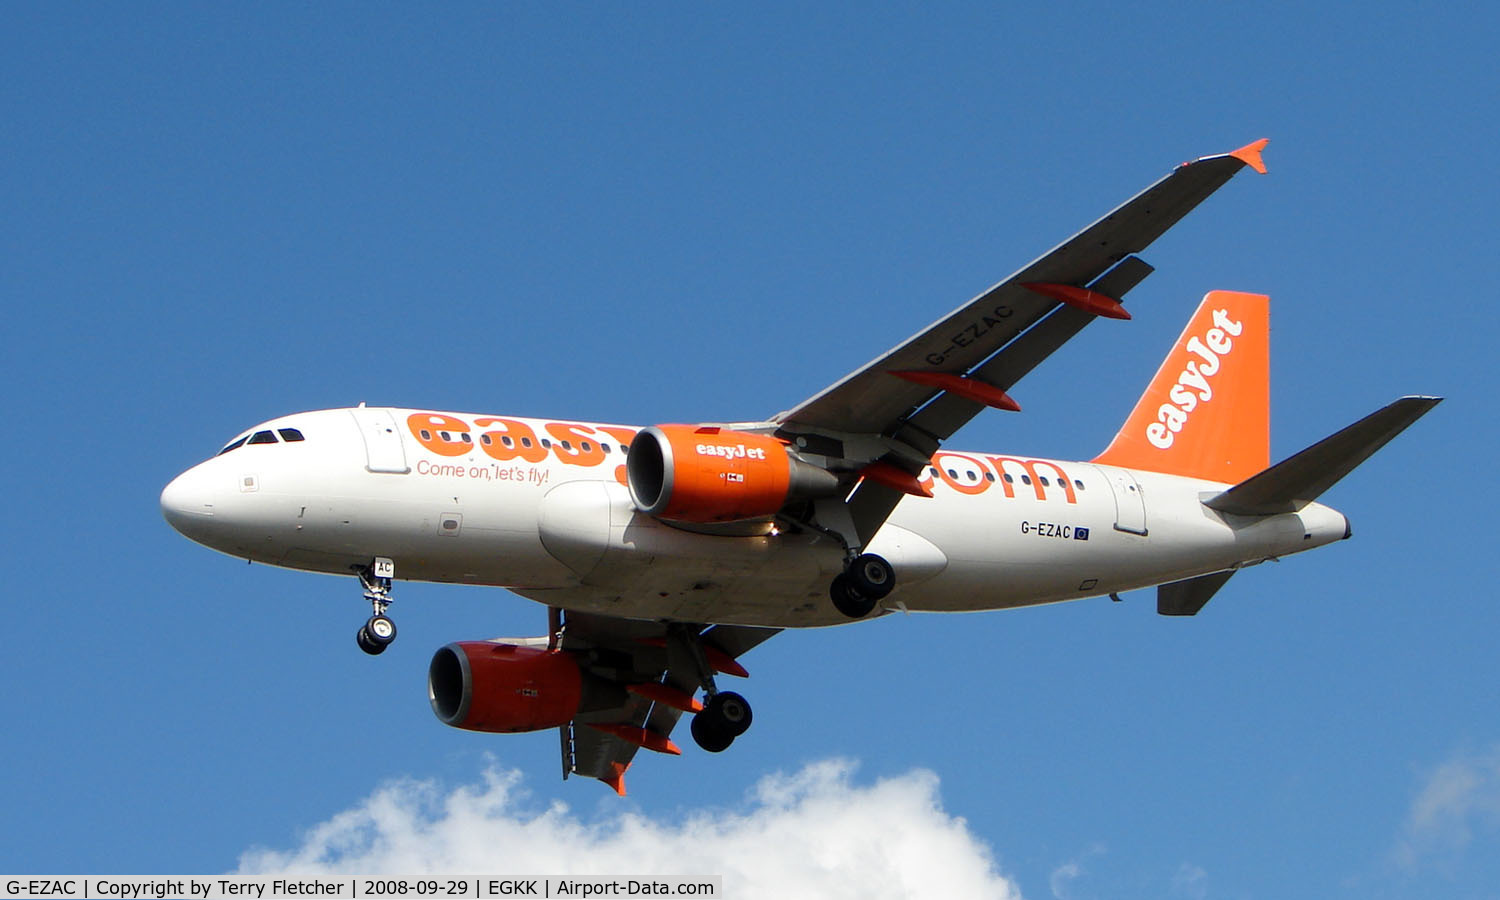 G-EZAC, 2006 Airbus A319-111 C/N 2691, Easyjet A319 about to land at London Gatwick